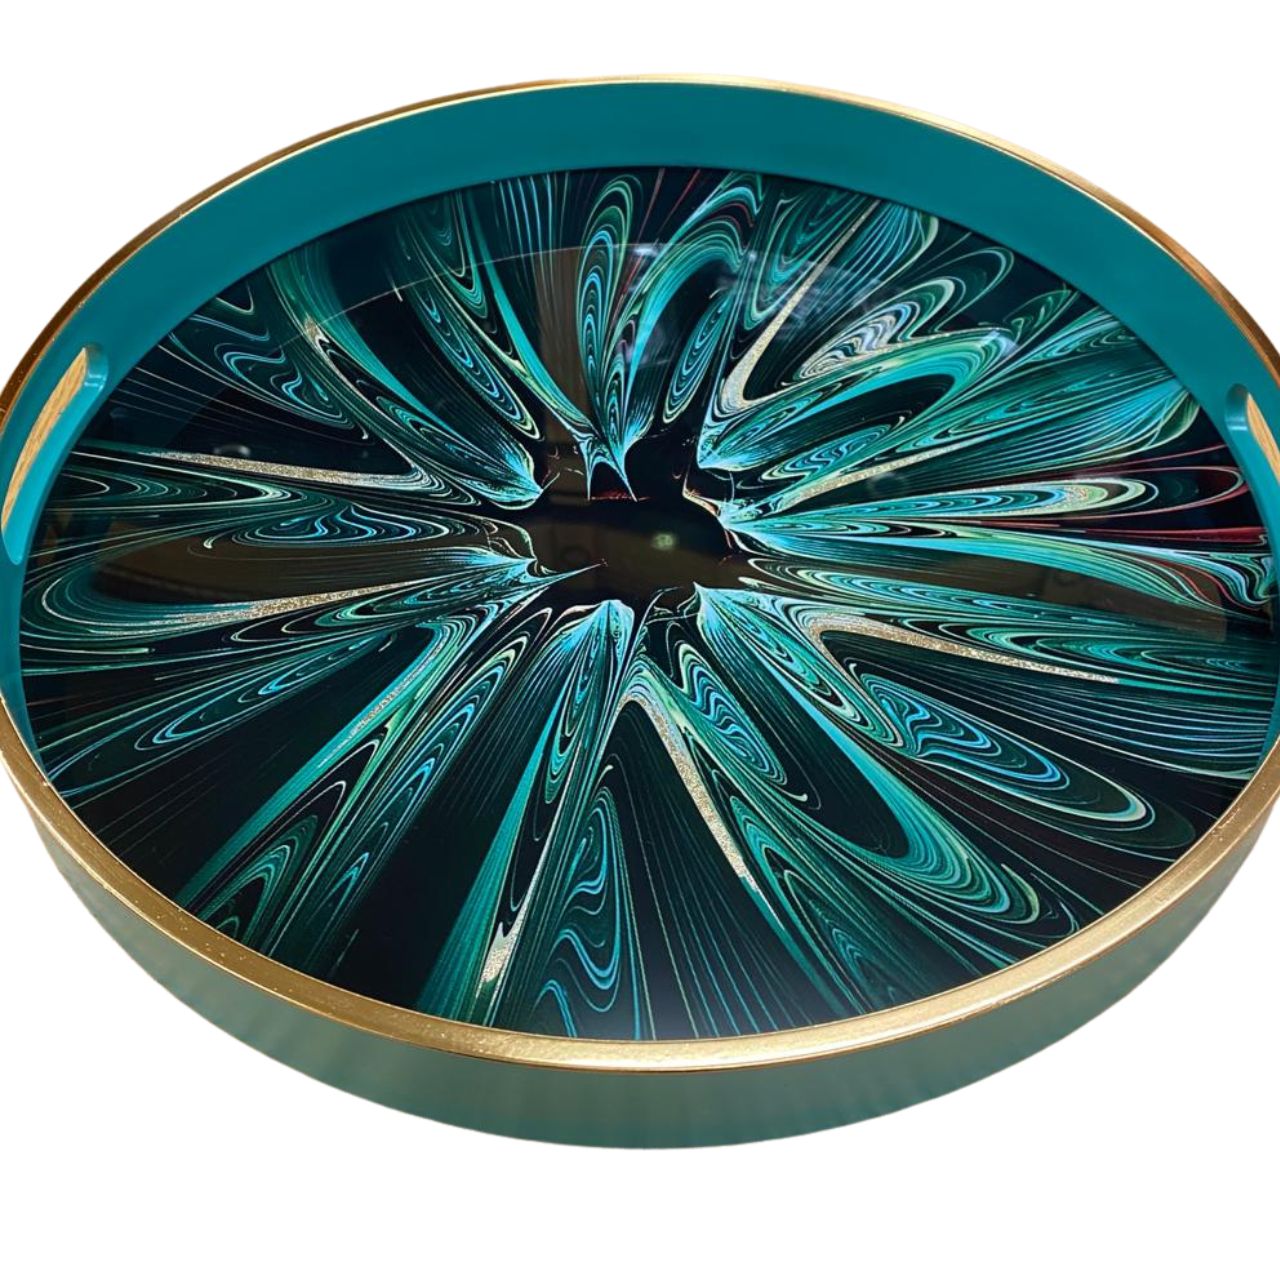 Mindy Brownes Interiors Serving Tray - Green Envy  The art of colour, a beautiful thing - Introduce a splash of colour to your décor with our vibrant glass coloured serving trays. The new collection showcases a myriad of rich and striking colour waves.